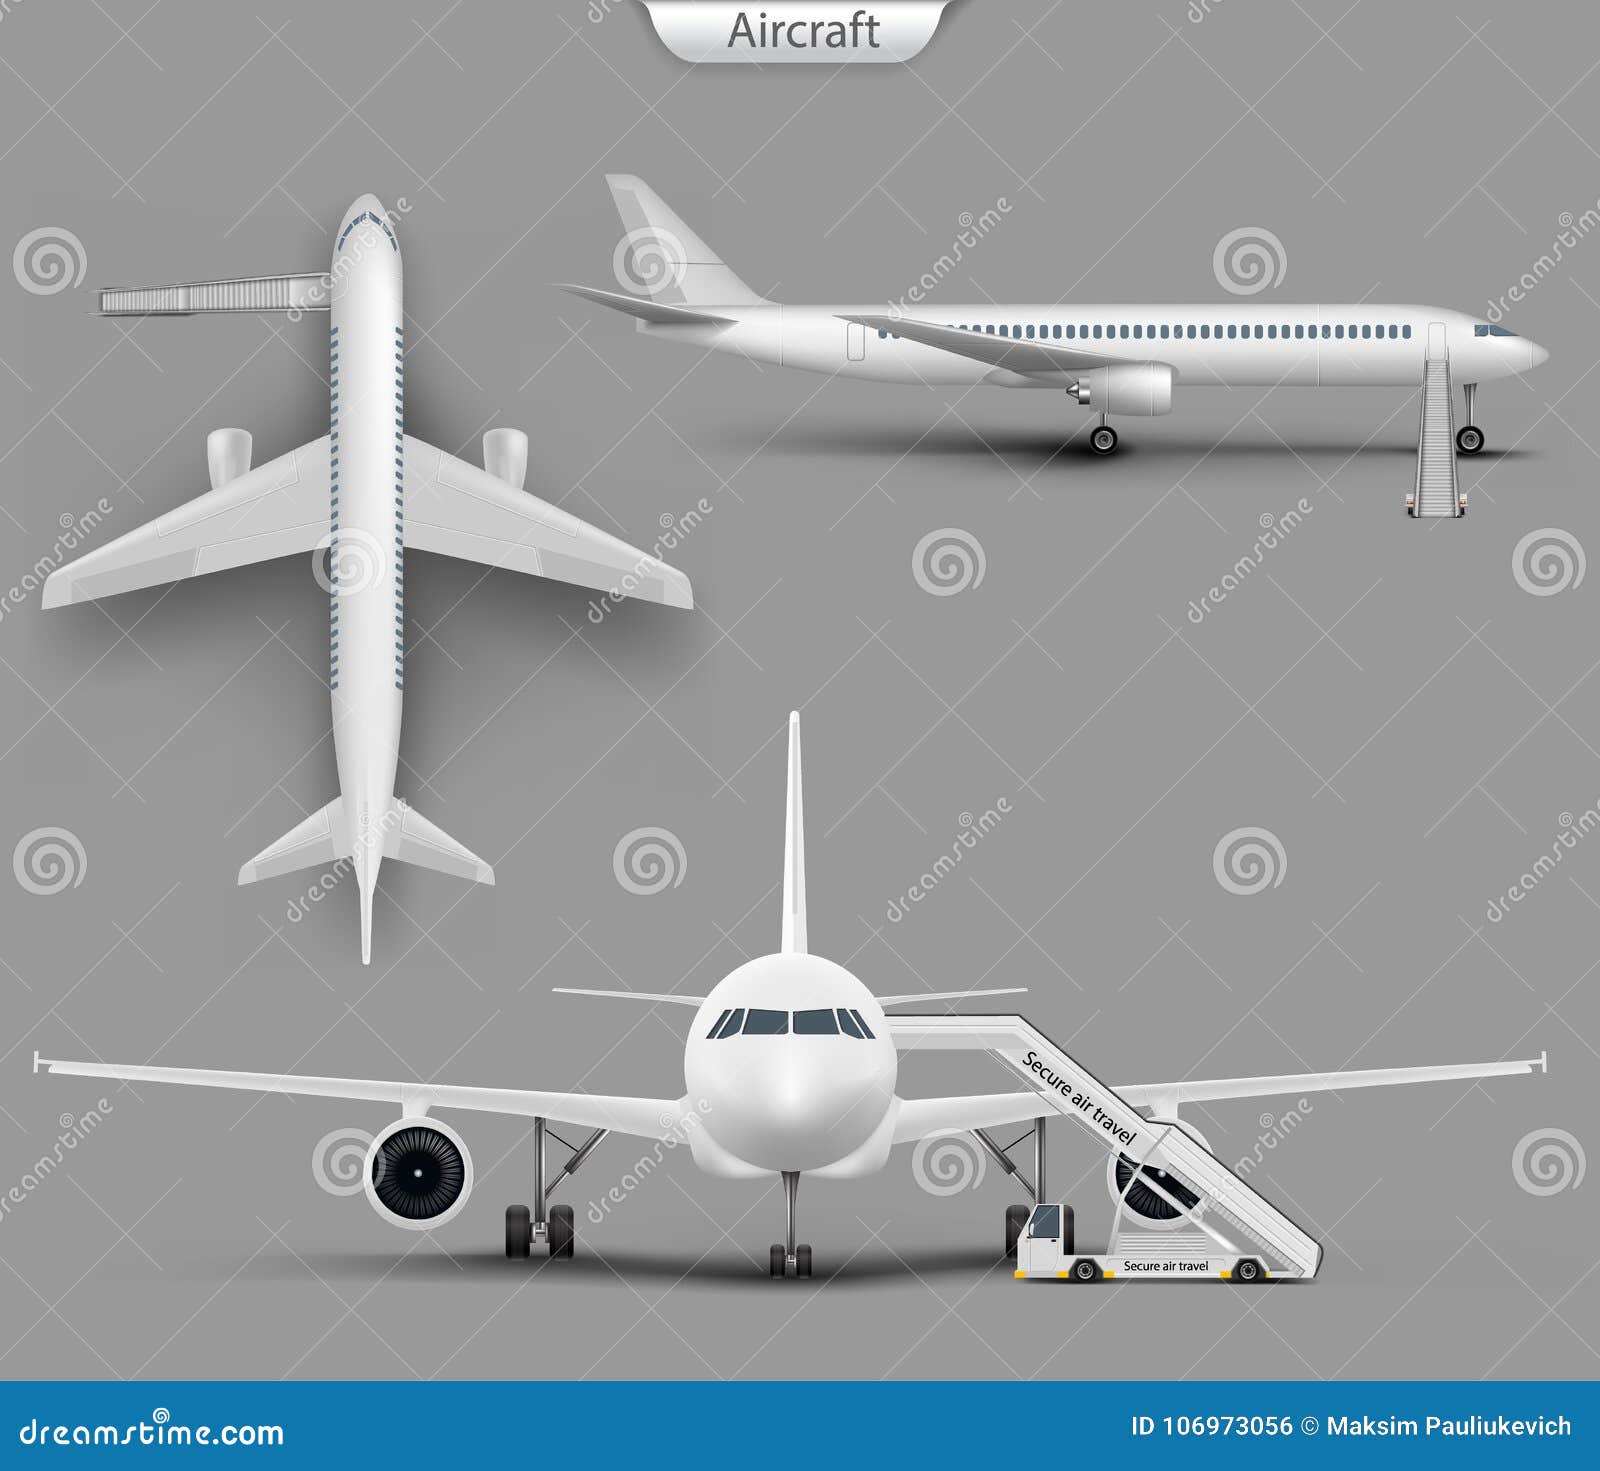 Download Vector Realistic Aircraft Airplane Mockup Set Stock Vector Illustration Of Realistic Silver 106973056